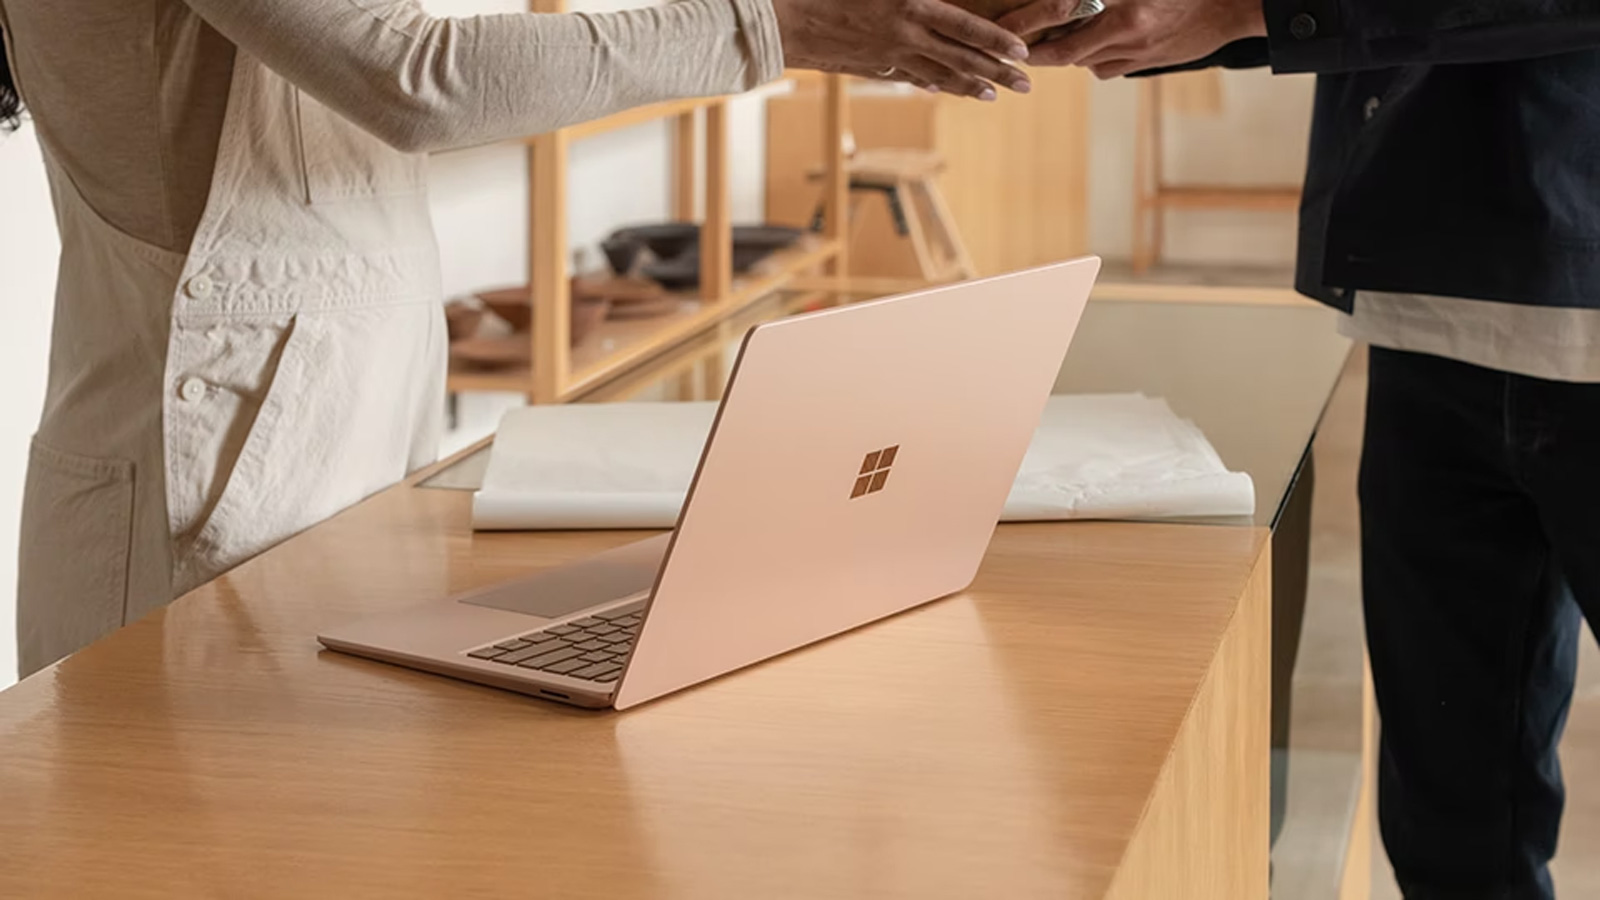 Save 49% on a factory-remanufactured Microsoft Surface Laptop 3